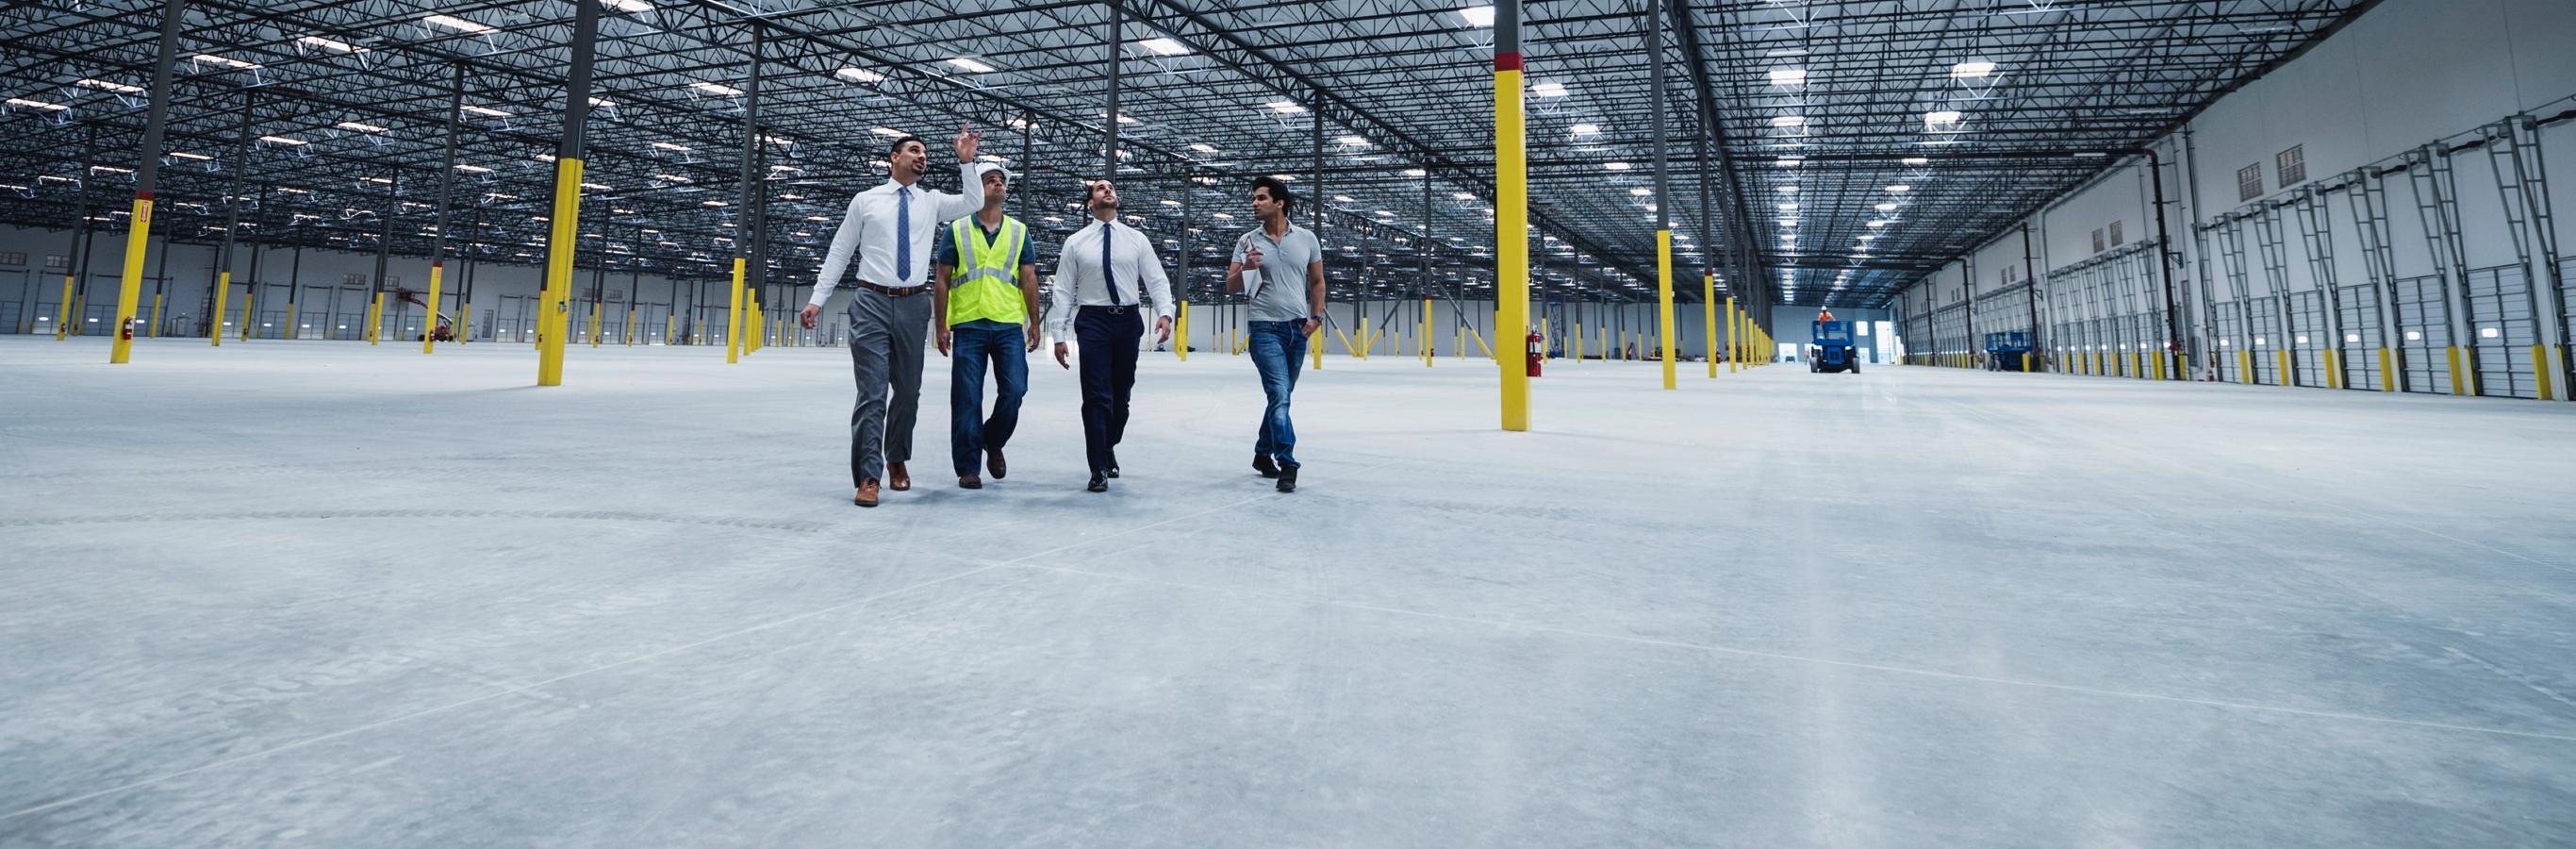 Investors walking through and inspecting an empty warehouse